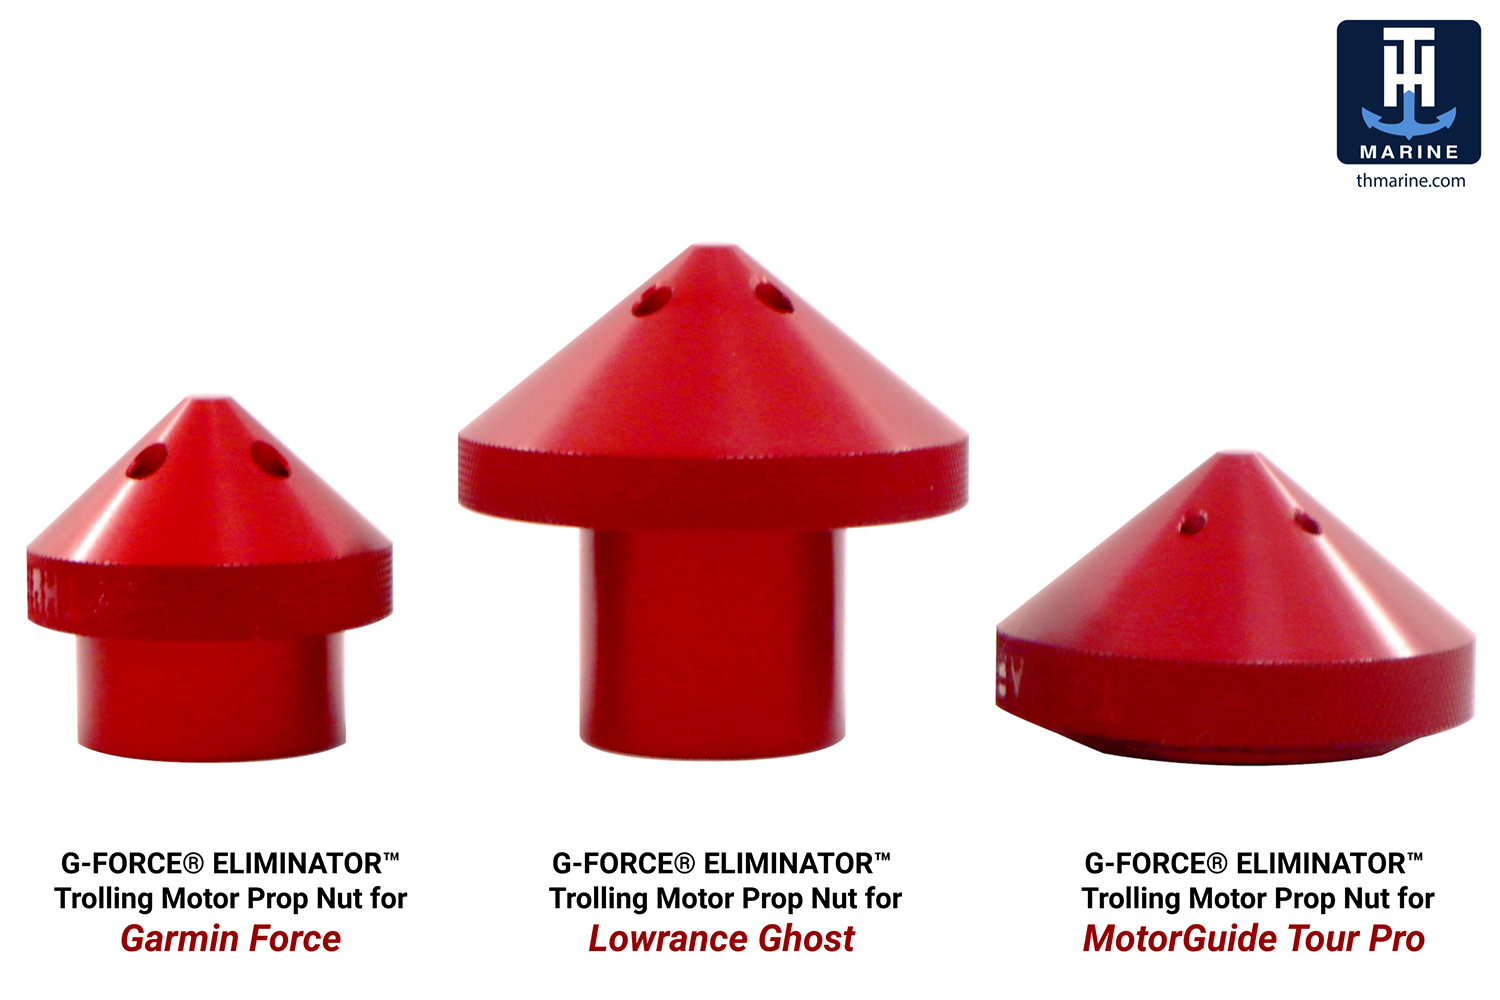 <p><b>NEW G-Force Eliminator Trolling Motor Prop Nuts</b></p>
<p>Designed to Optimize Garmin Force, Lowrance Ghost, and MotorGuide Tour Pro trolling motors. Anglers love the G-Force Eliminator Trolling Motor Prop Nut because it is built to make trolling motors perform better, longer, and quieter. Specifically, it is designed to lessen prop noise and vibration, and it stabilizes the prop by providing a larger contact point. In addition, it acts as a heat sink and has built-in cooling ports that reduce the operating temperature for longer battery and trolling motor life. </p>
<p><a href=